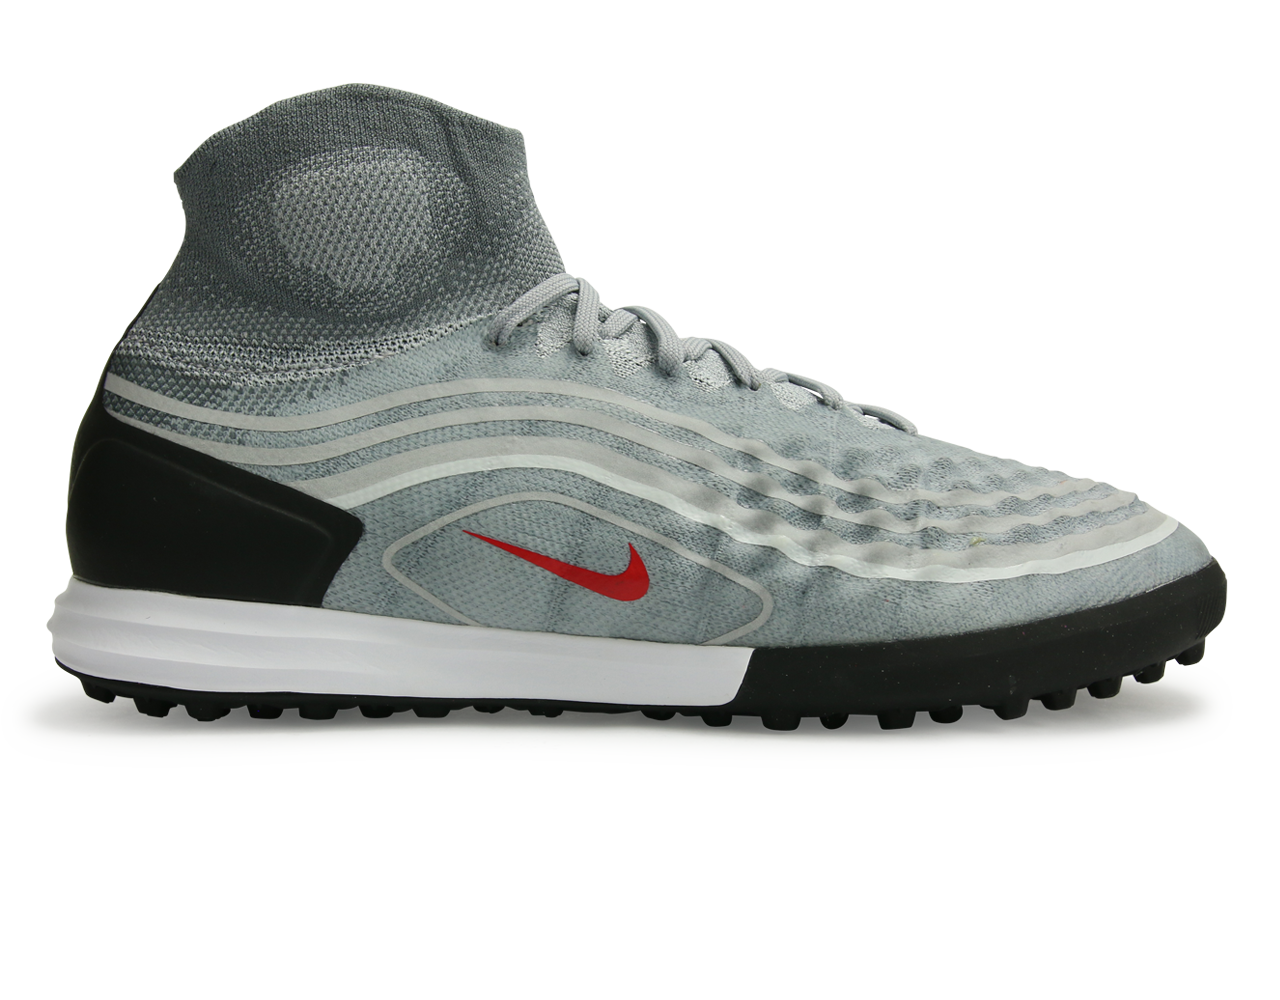 Nike, Nike Men's MagistaX Proximo II Dynamic Fit Turf Soccer Shoes Cool Grey/Varsity Red/Black/Wolf Grey